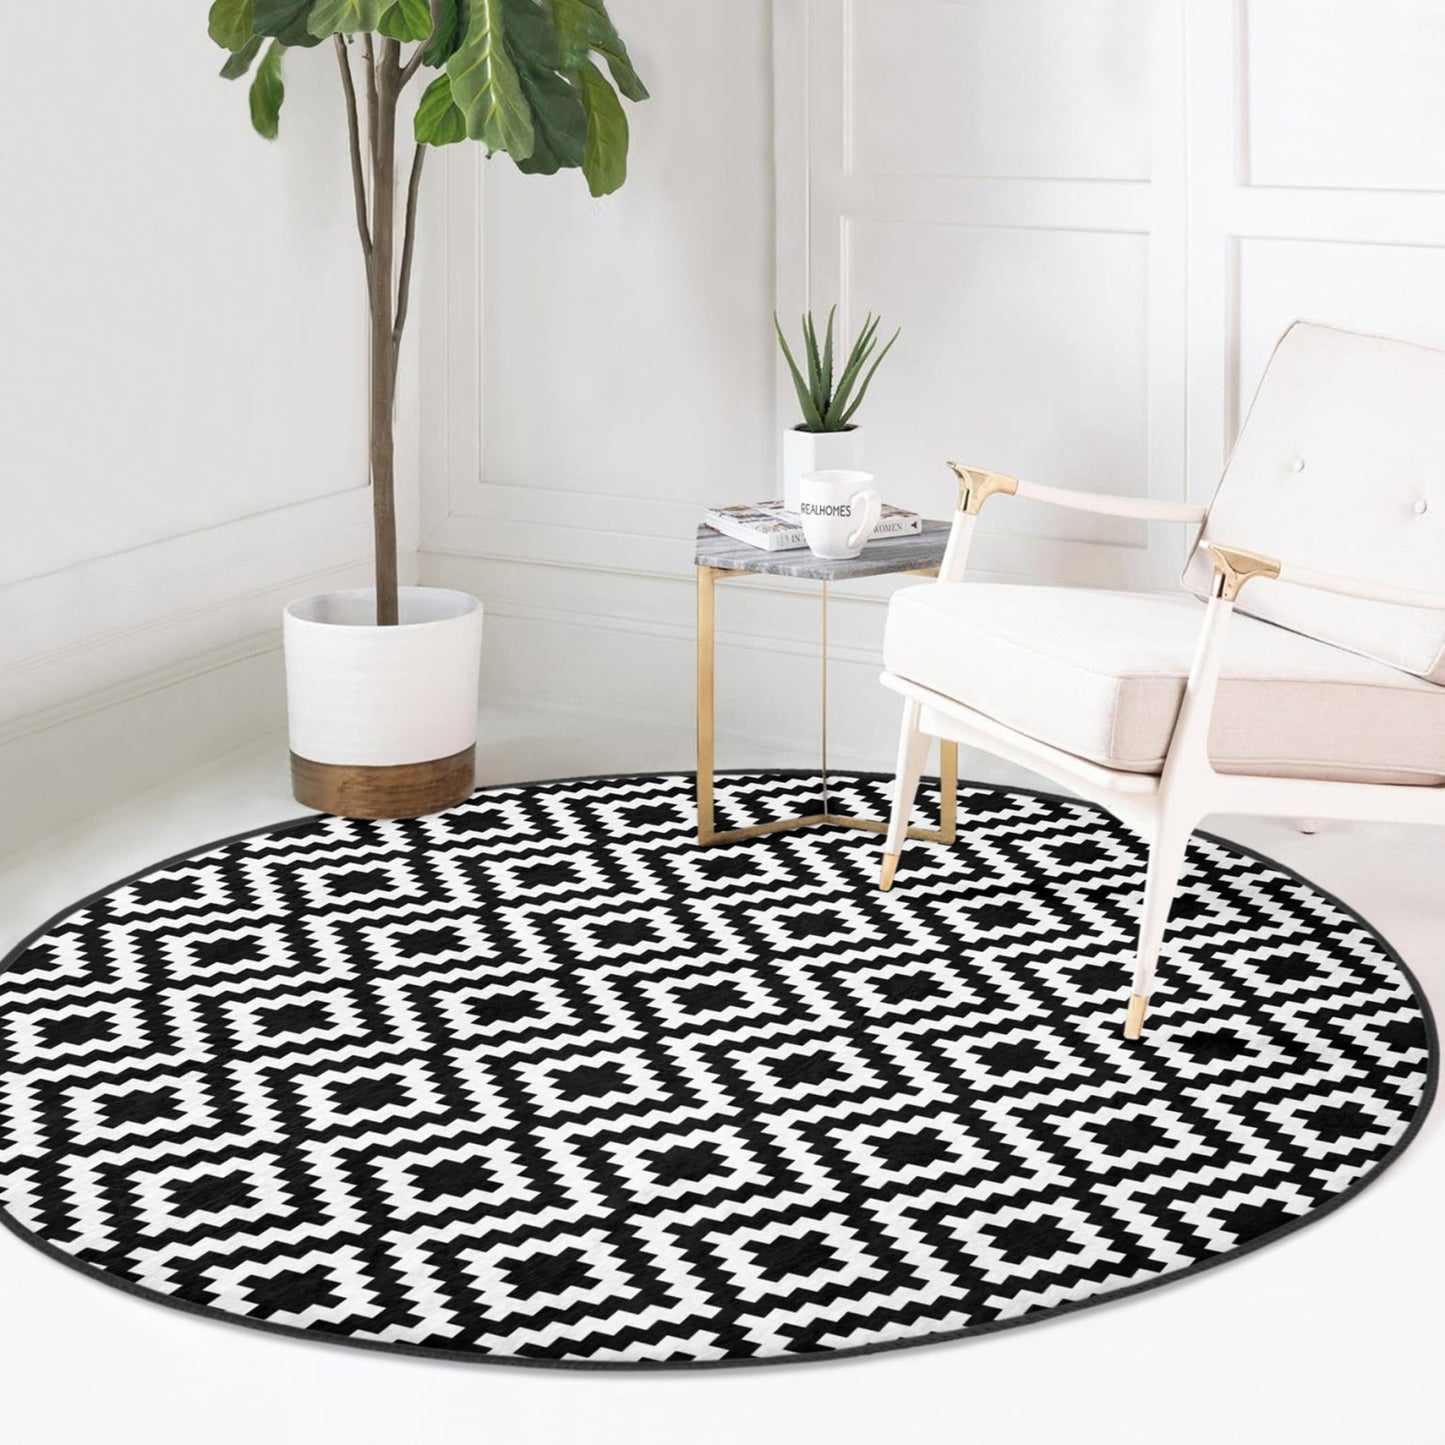 Living Room Rug with Modern Decorative Pattern